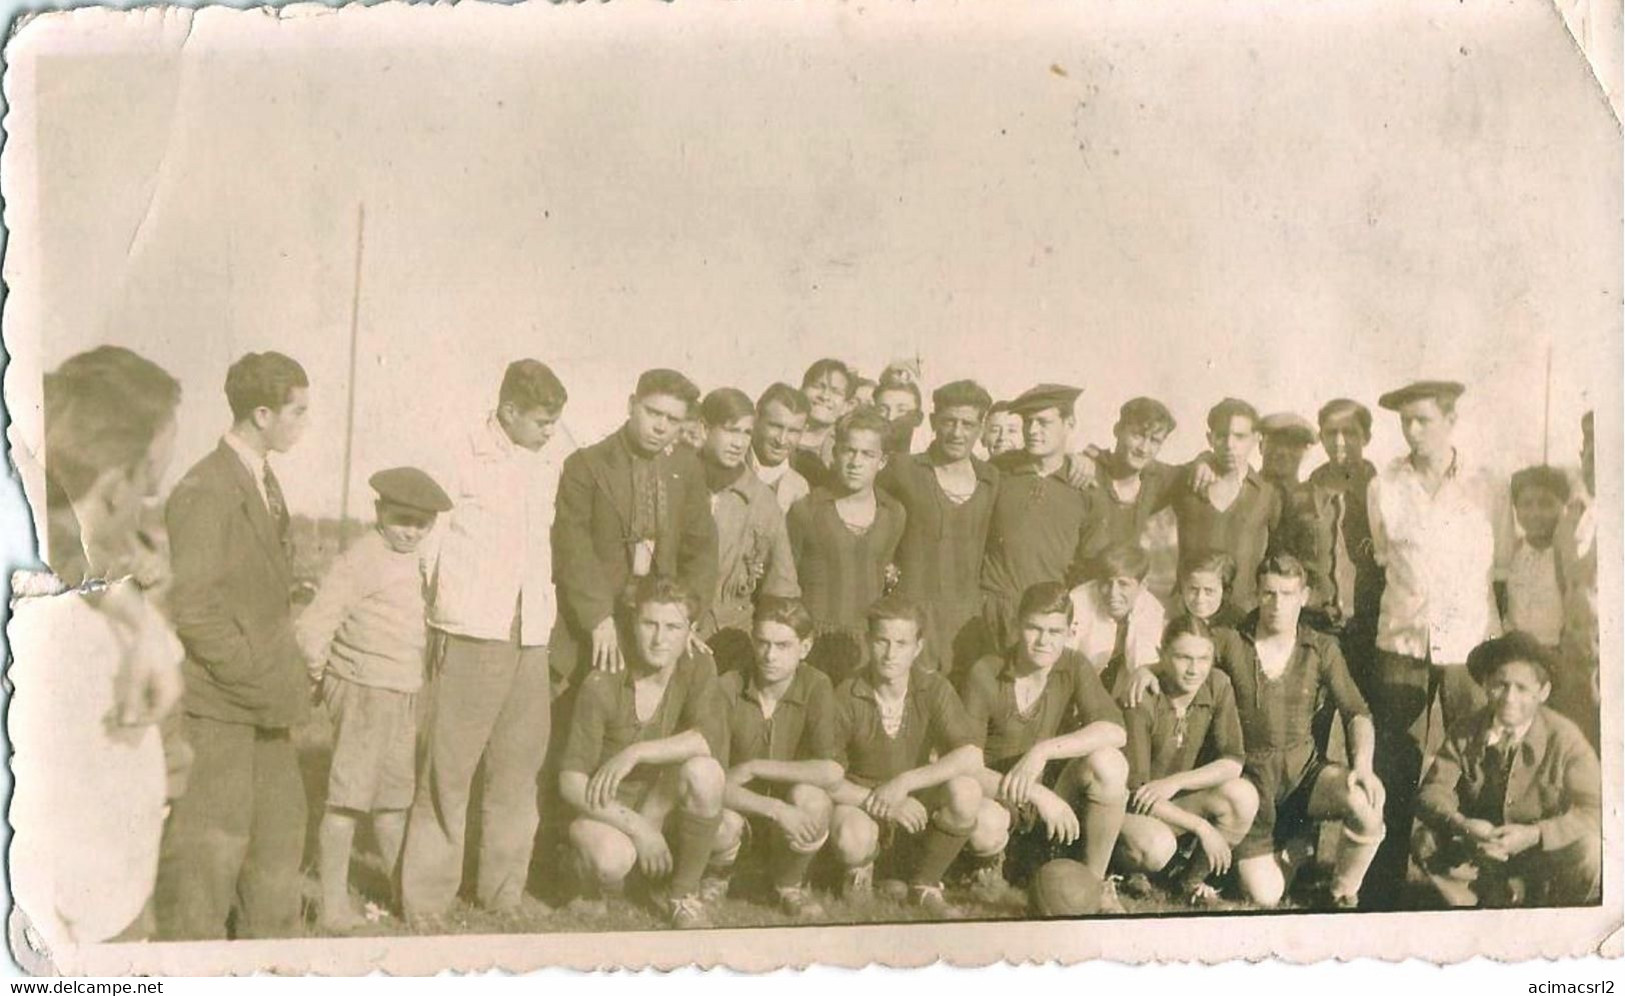 X1425 - Young Men & Teen Boys In Shorts Together Futbol Football Soccer Players - Photo 13x8cm 1940' - Deportes